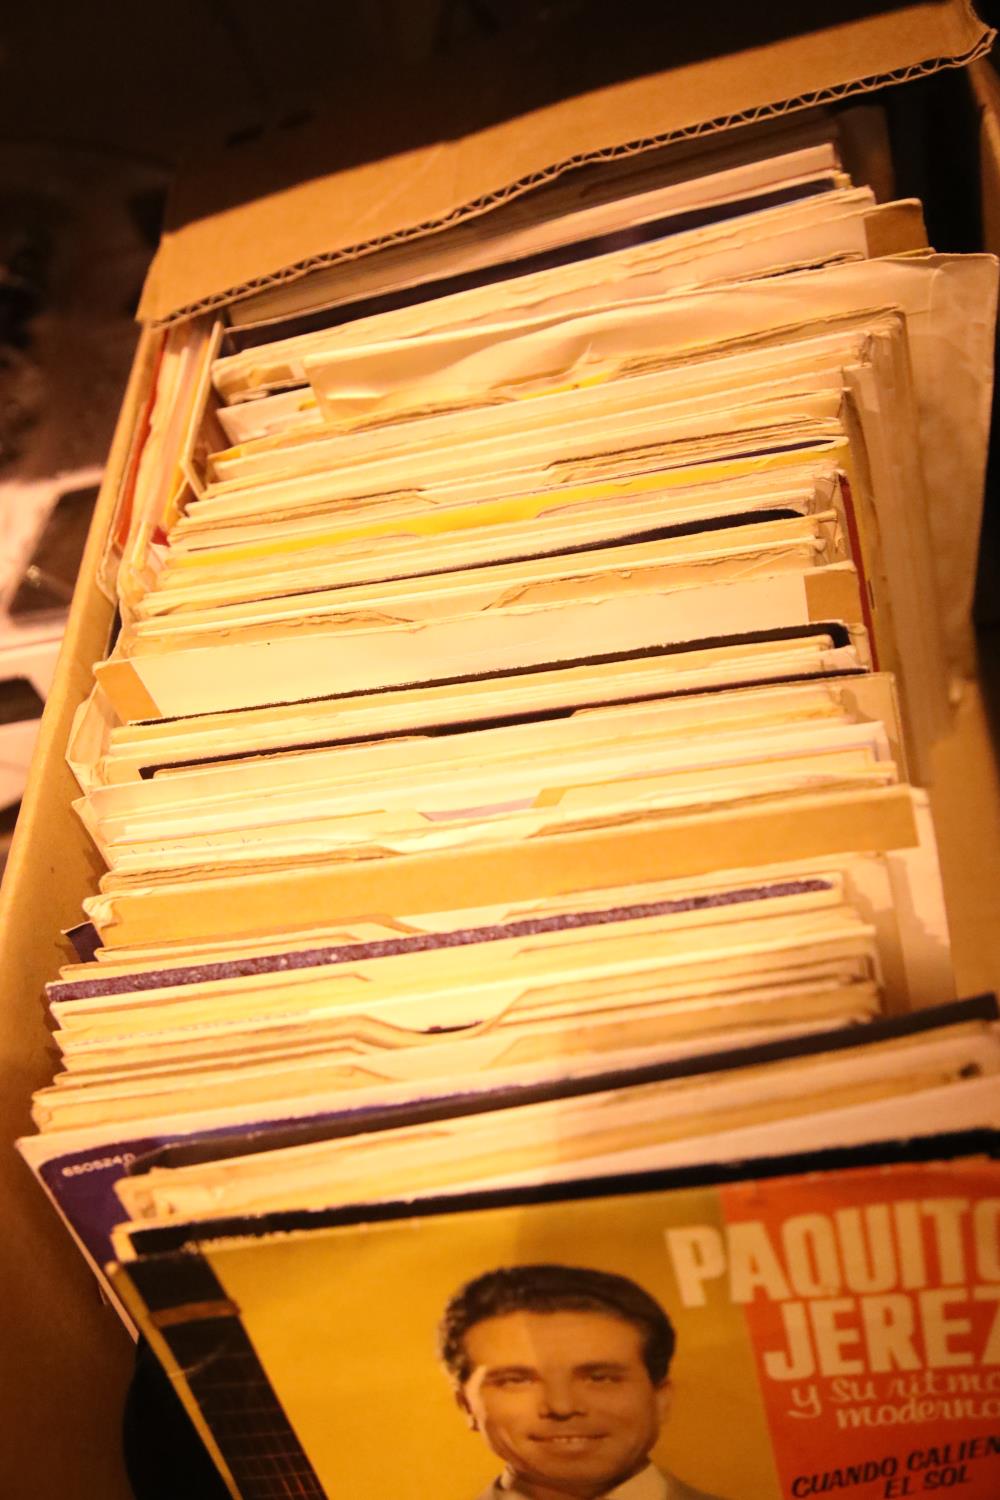 Box containing a large selection of 7" vinyls including Sacha Distel, the Ventures etc. Not